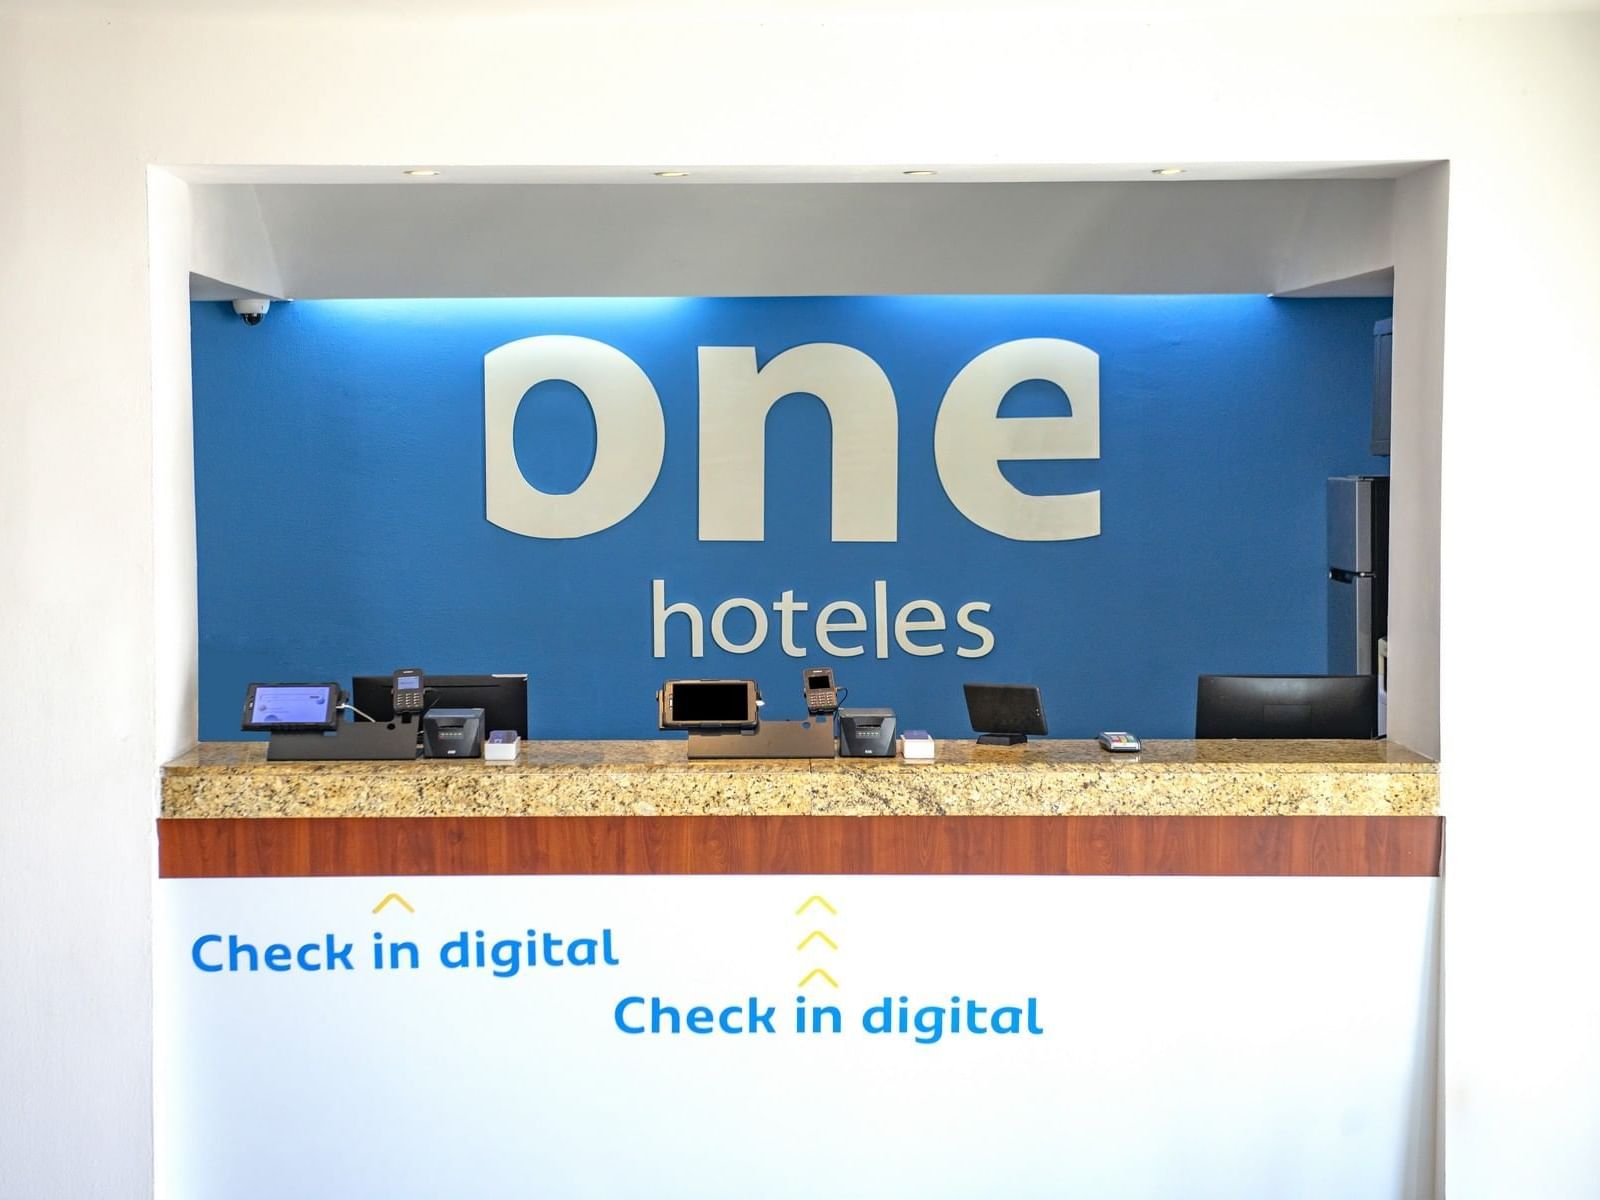 Digital check-in by the front desk at One Hotels